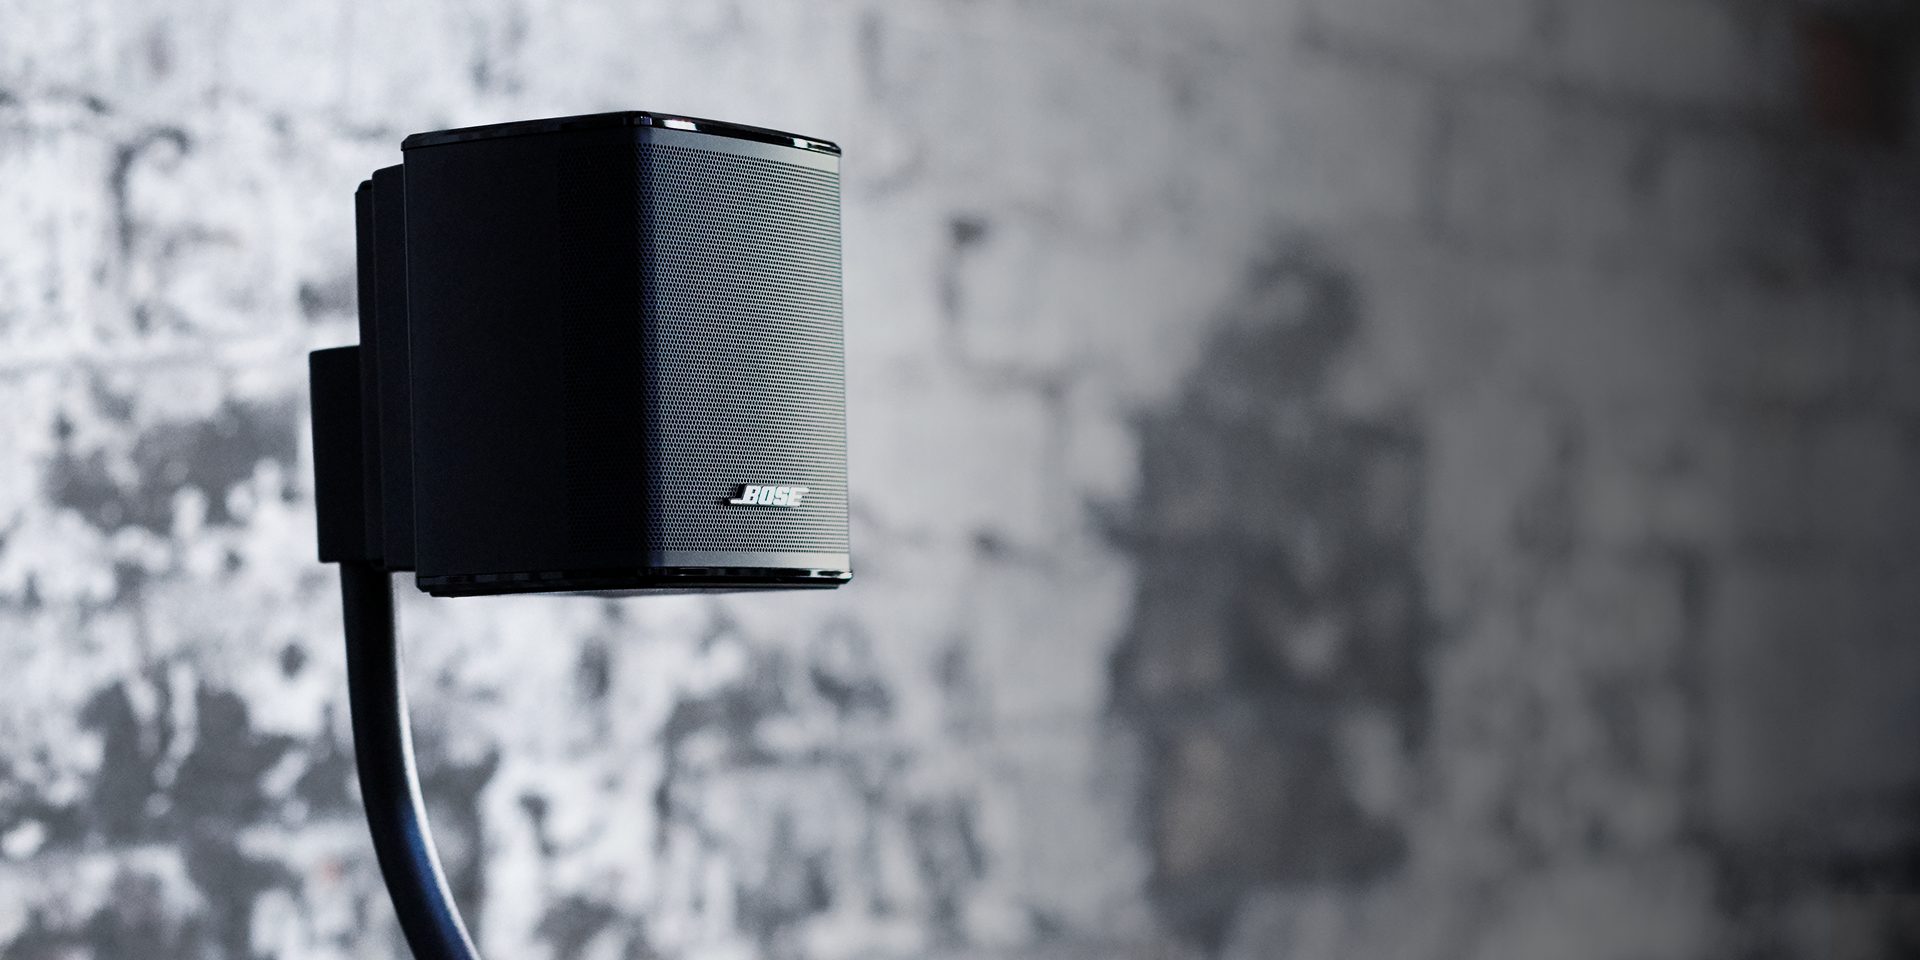 Bose Surround Speakers And Receivers   Speakers   Everyday Home